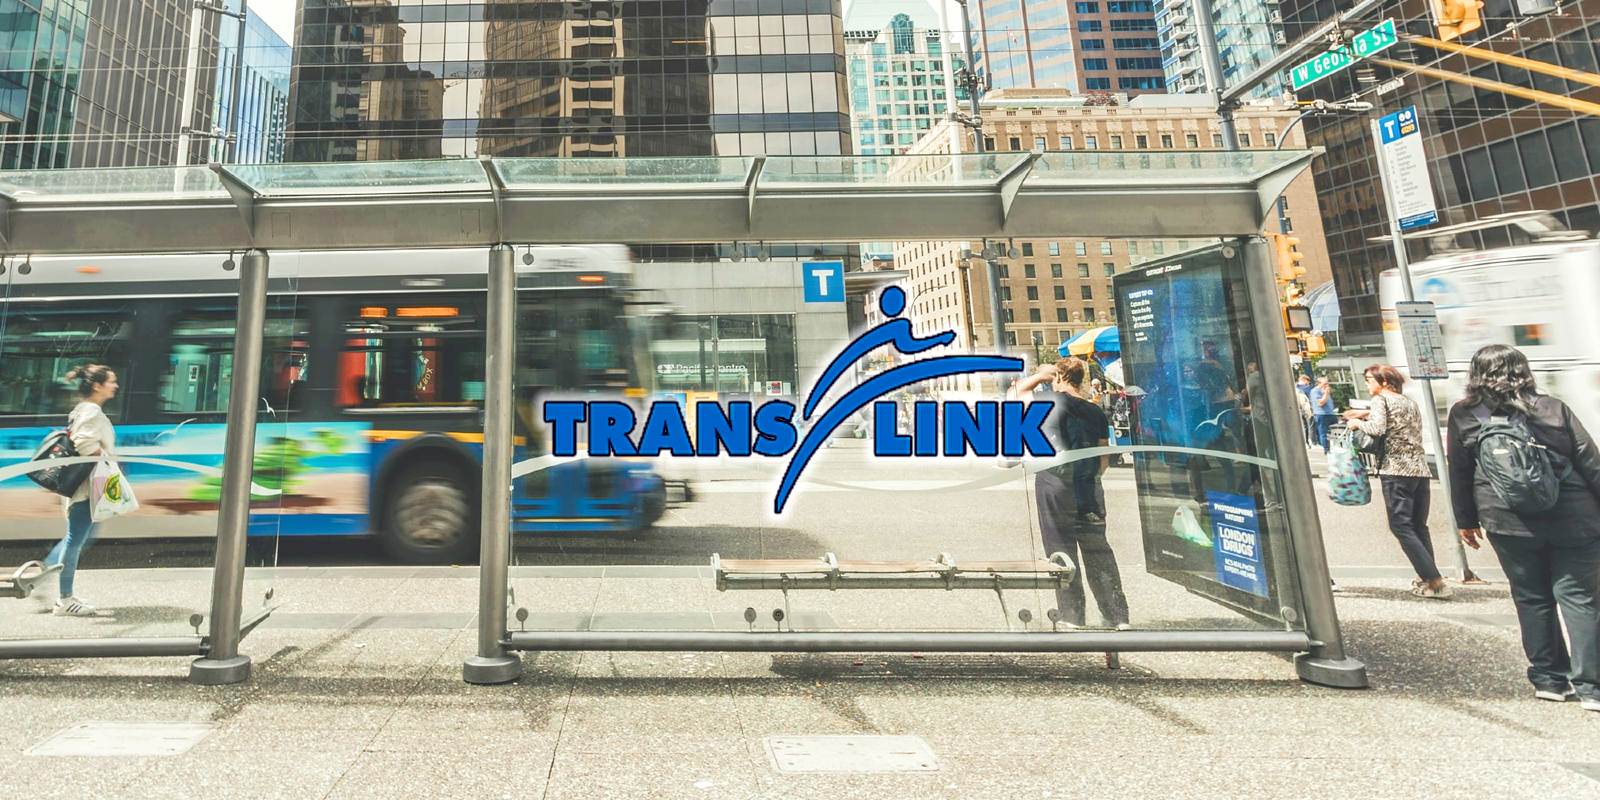 metro-vancouver’s-transportation-agency-translink-confirms-ransomware-data-theft